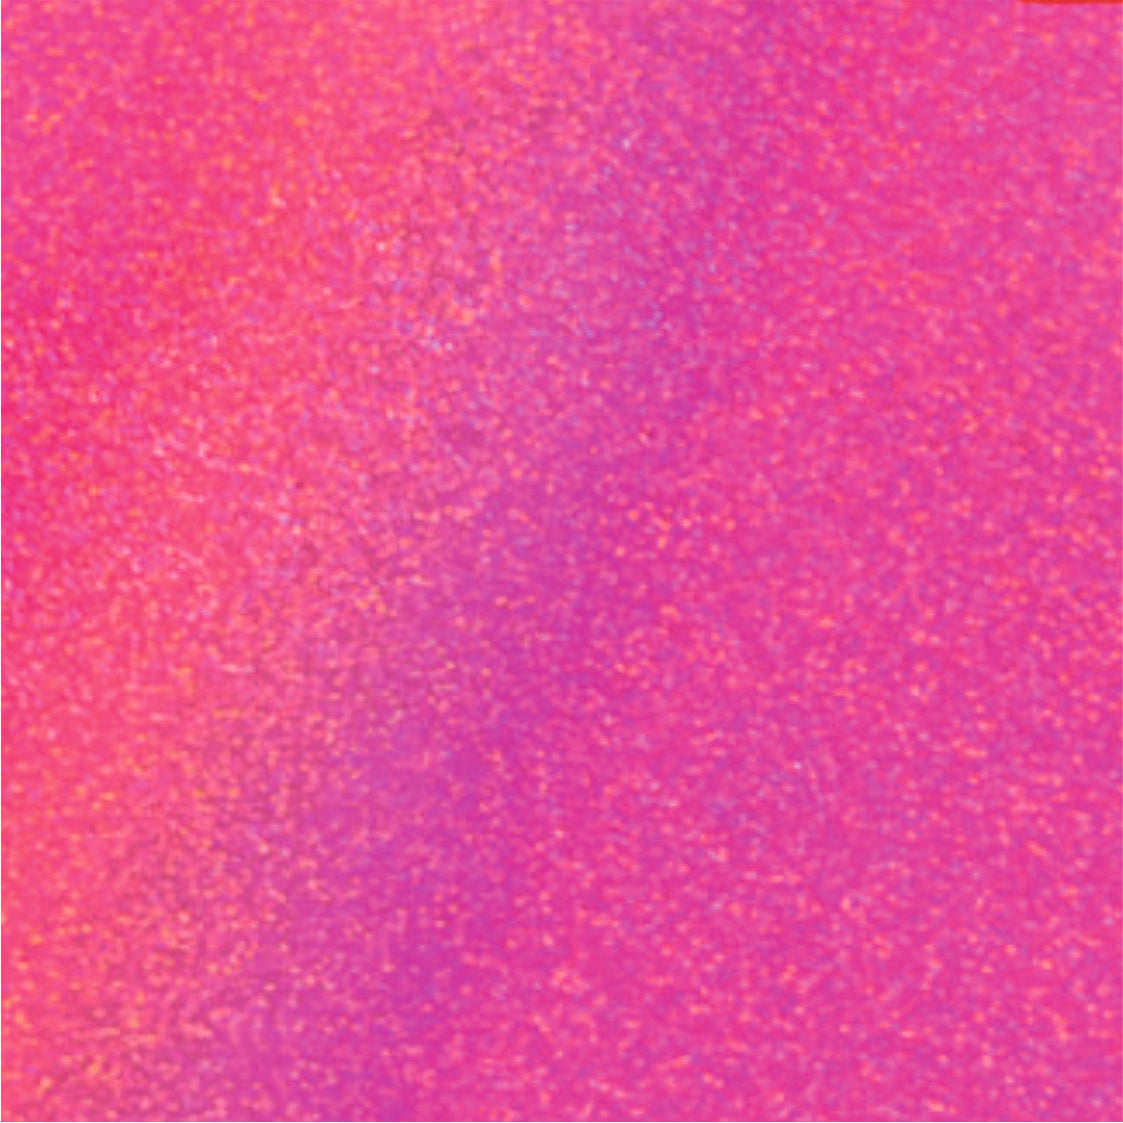 Holographic Sparkle Self Adhesive :- Fluo Pink - A4 sheet